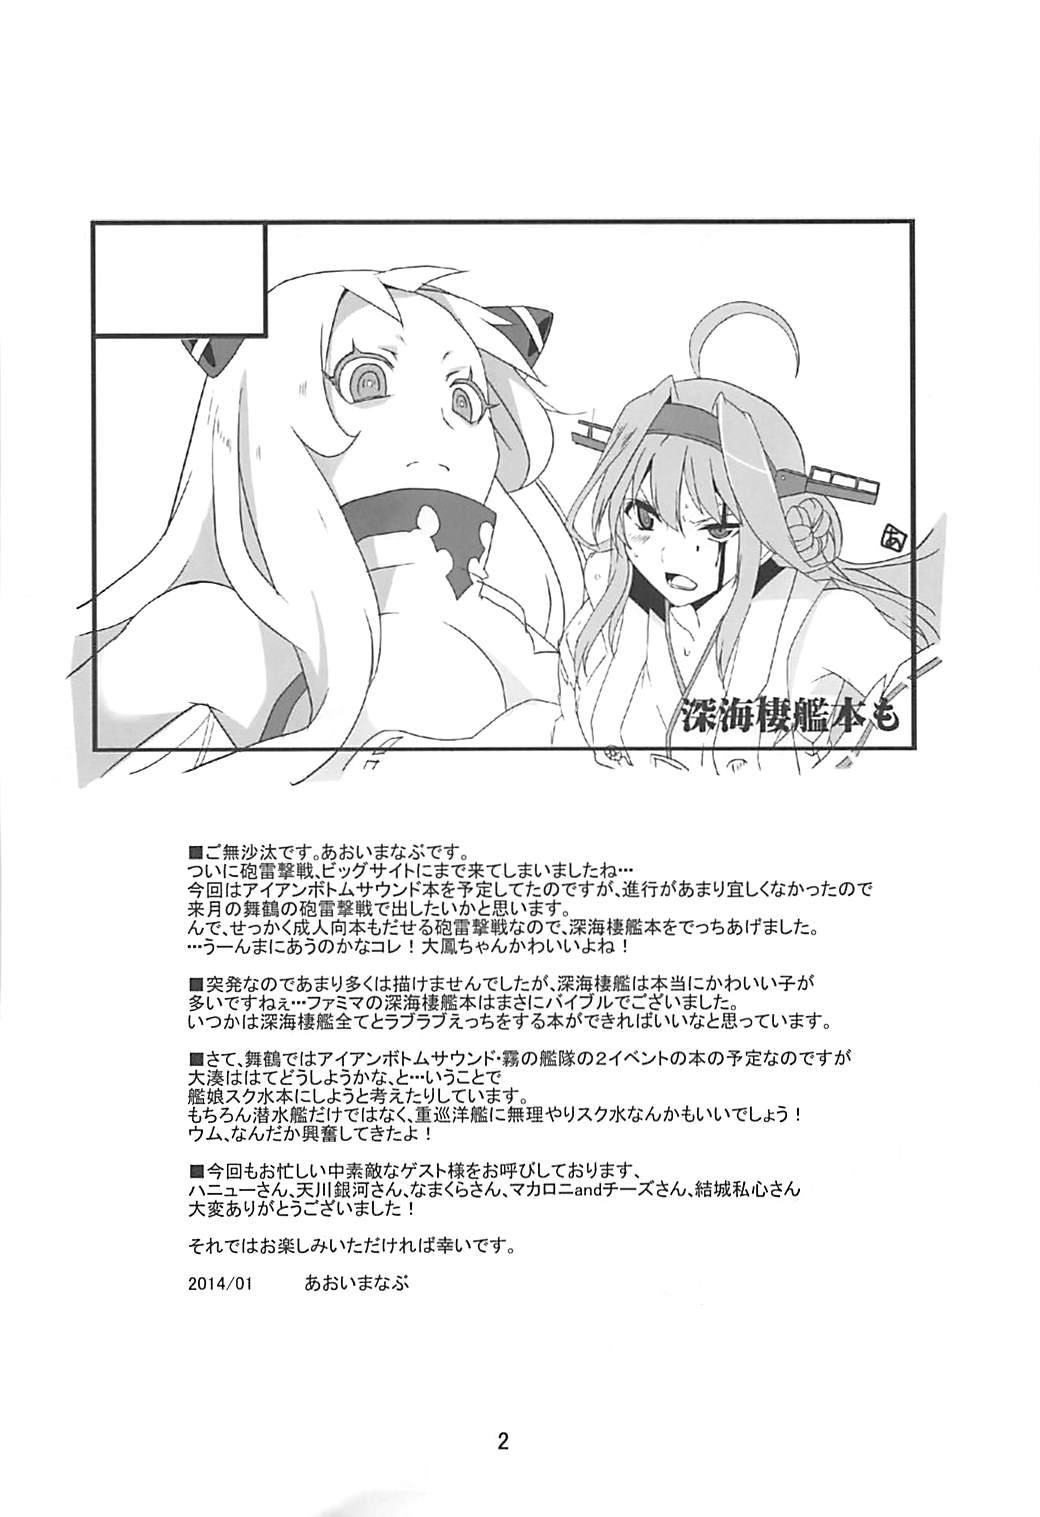 Old Man ISO - Ironbottom Sound Oppai - Kantai collection Arrecha - Page 3